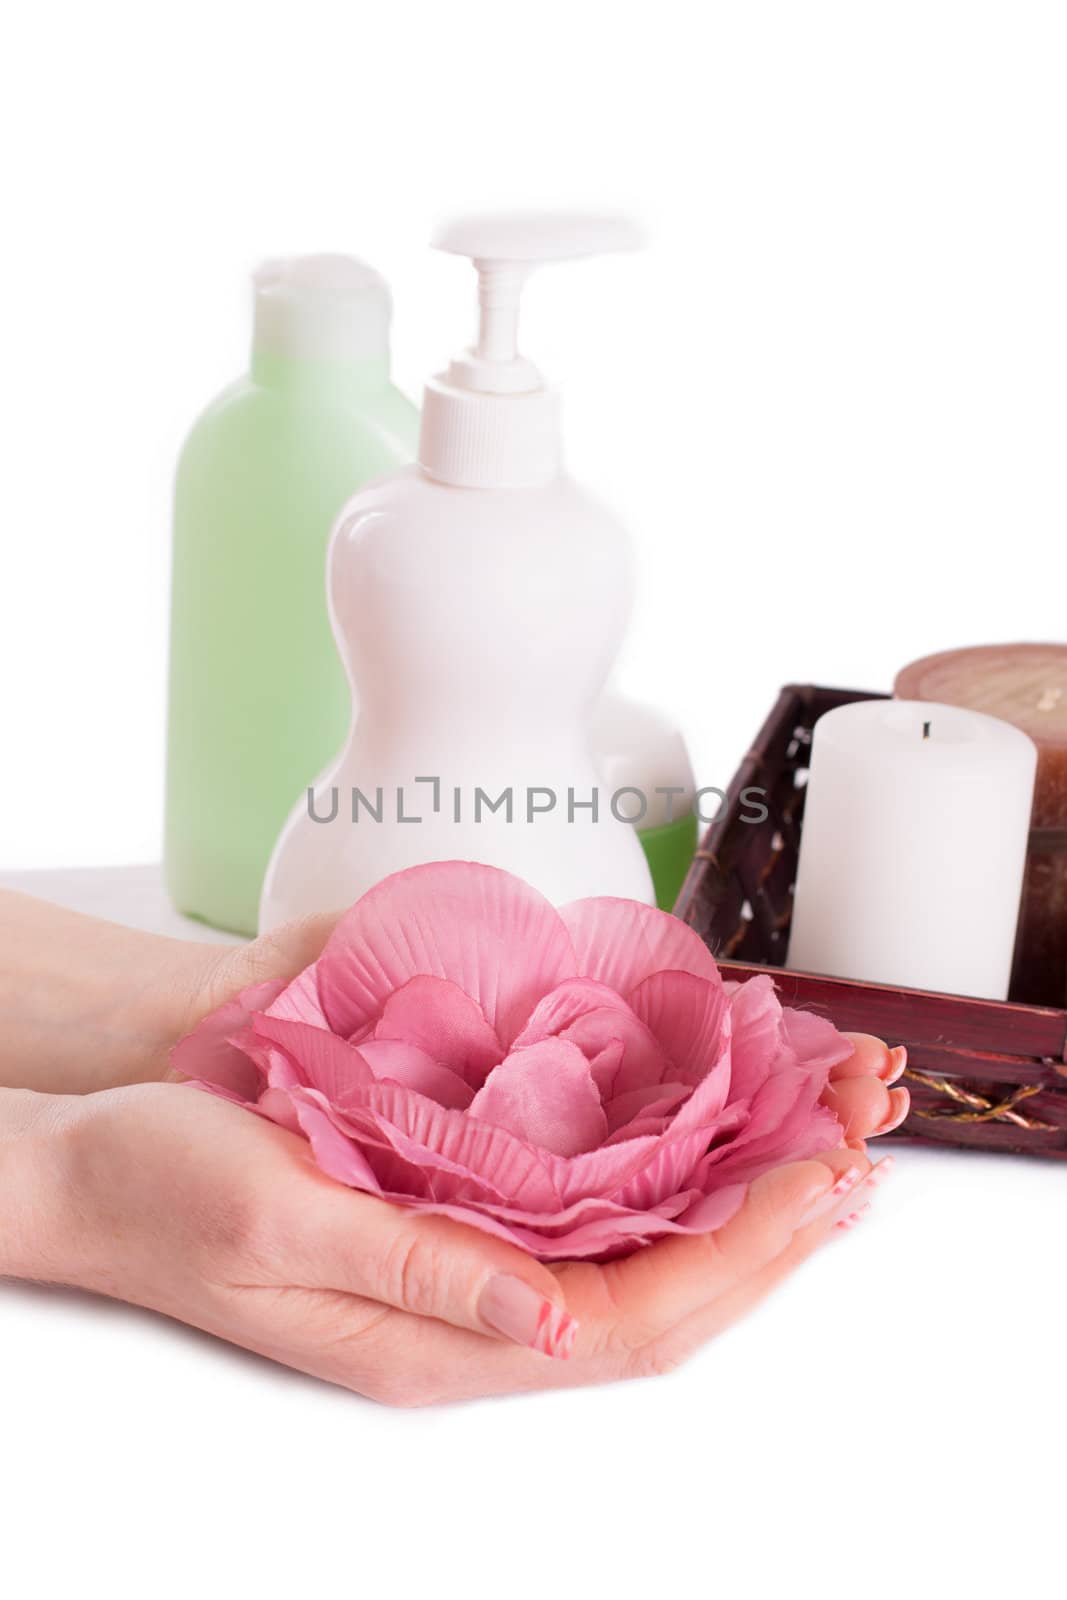 Woman hands with manicure and hand care products by Angel_a